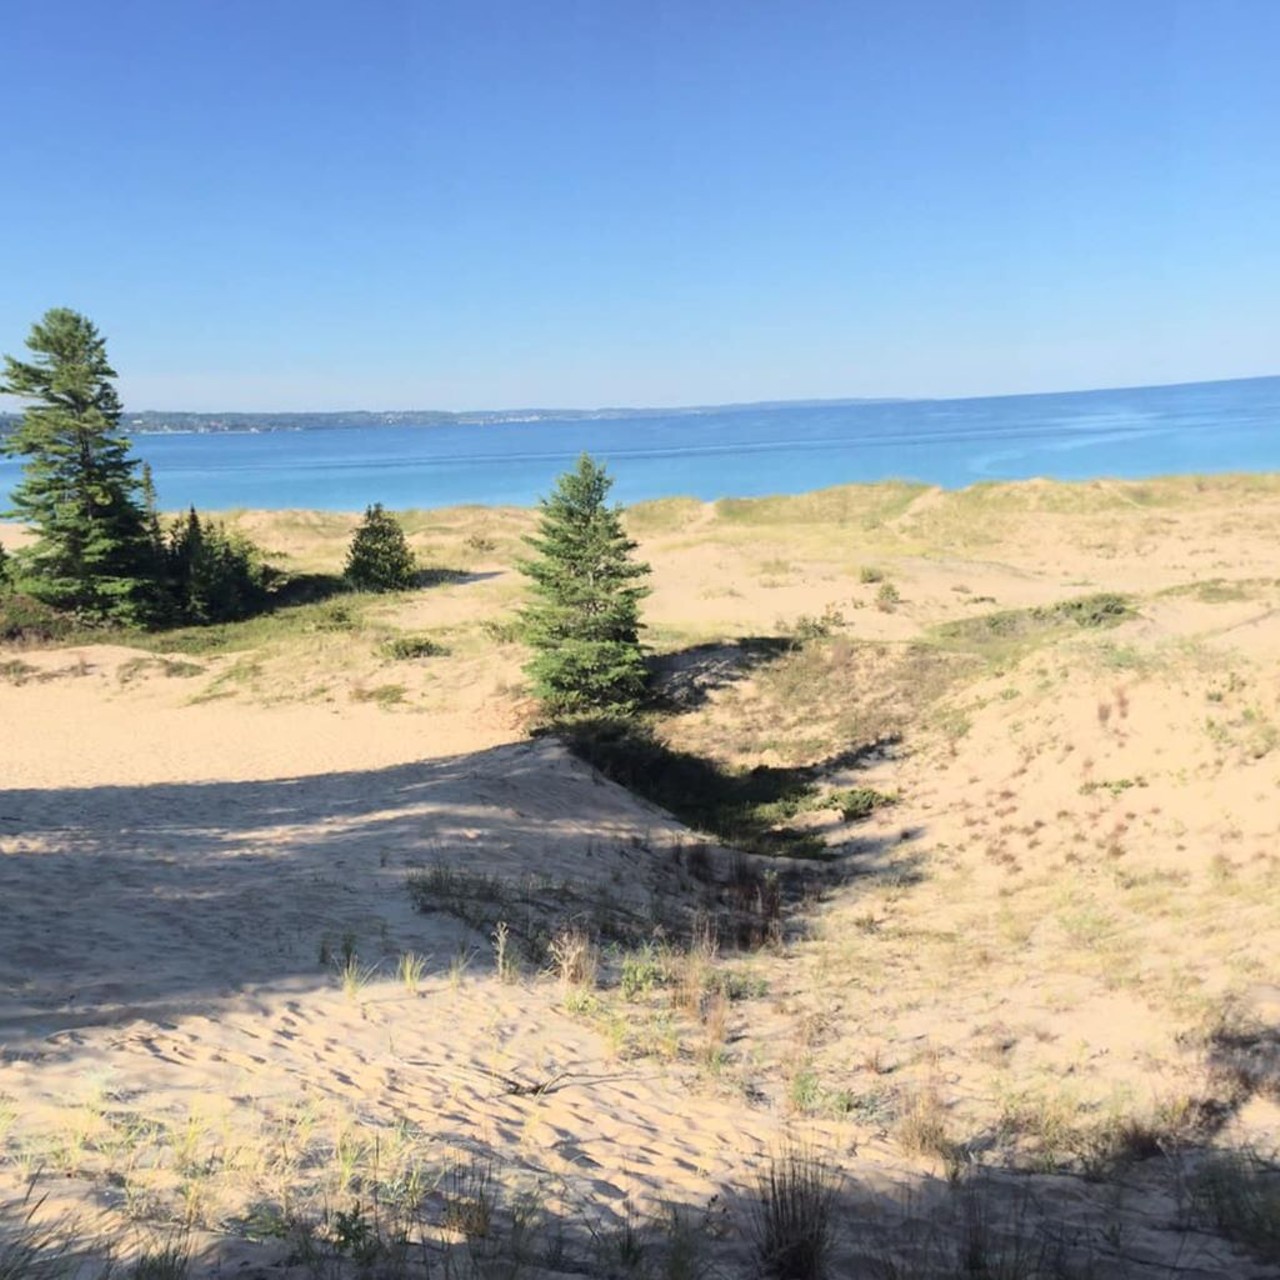 Petoskey State Park
2475 M-119 Hwy., Petoskey;231-347-2311; dnr.state.mi.us
We know it&#146;s tempting. With Petoskey State Park located between Harbor Springs and Petoskey &#151; both major hot spots for shopping, art fairs, and good eats &#151; it might be, at first glance, hard staying put along the 303 scenic acres of the state park which offers sandy beaches, two campgrounds, and hiking trails. But, no, it&#146;s not that friggin&#146; hard because nothing beats hunting for Petoskey stones along the shoreline, which is something you could, and should, be doing. Shopping can wait.
Photo via Petoskey State Park/Facebook